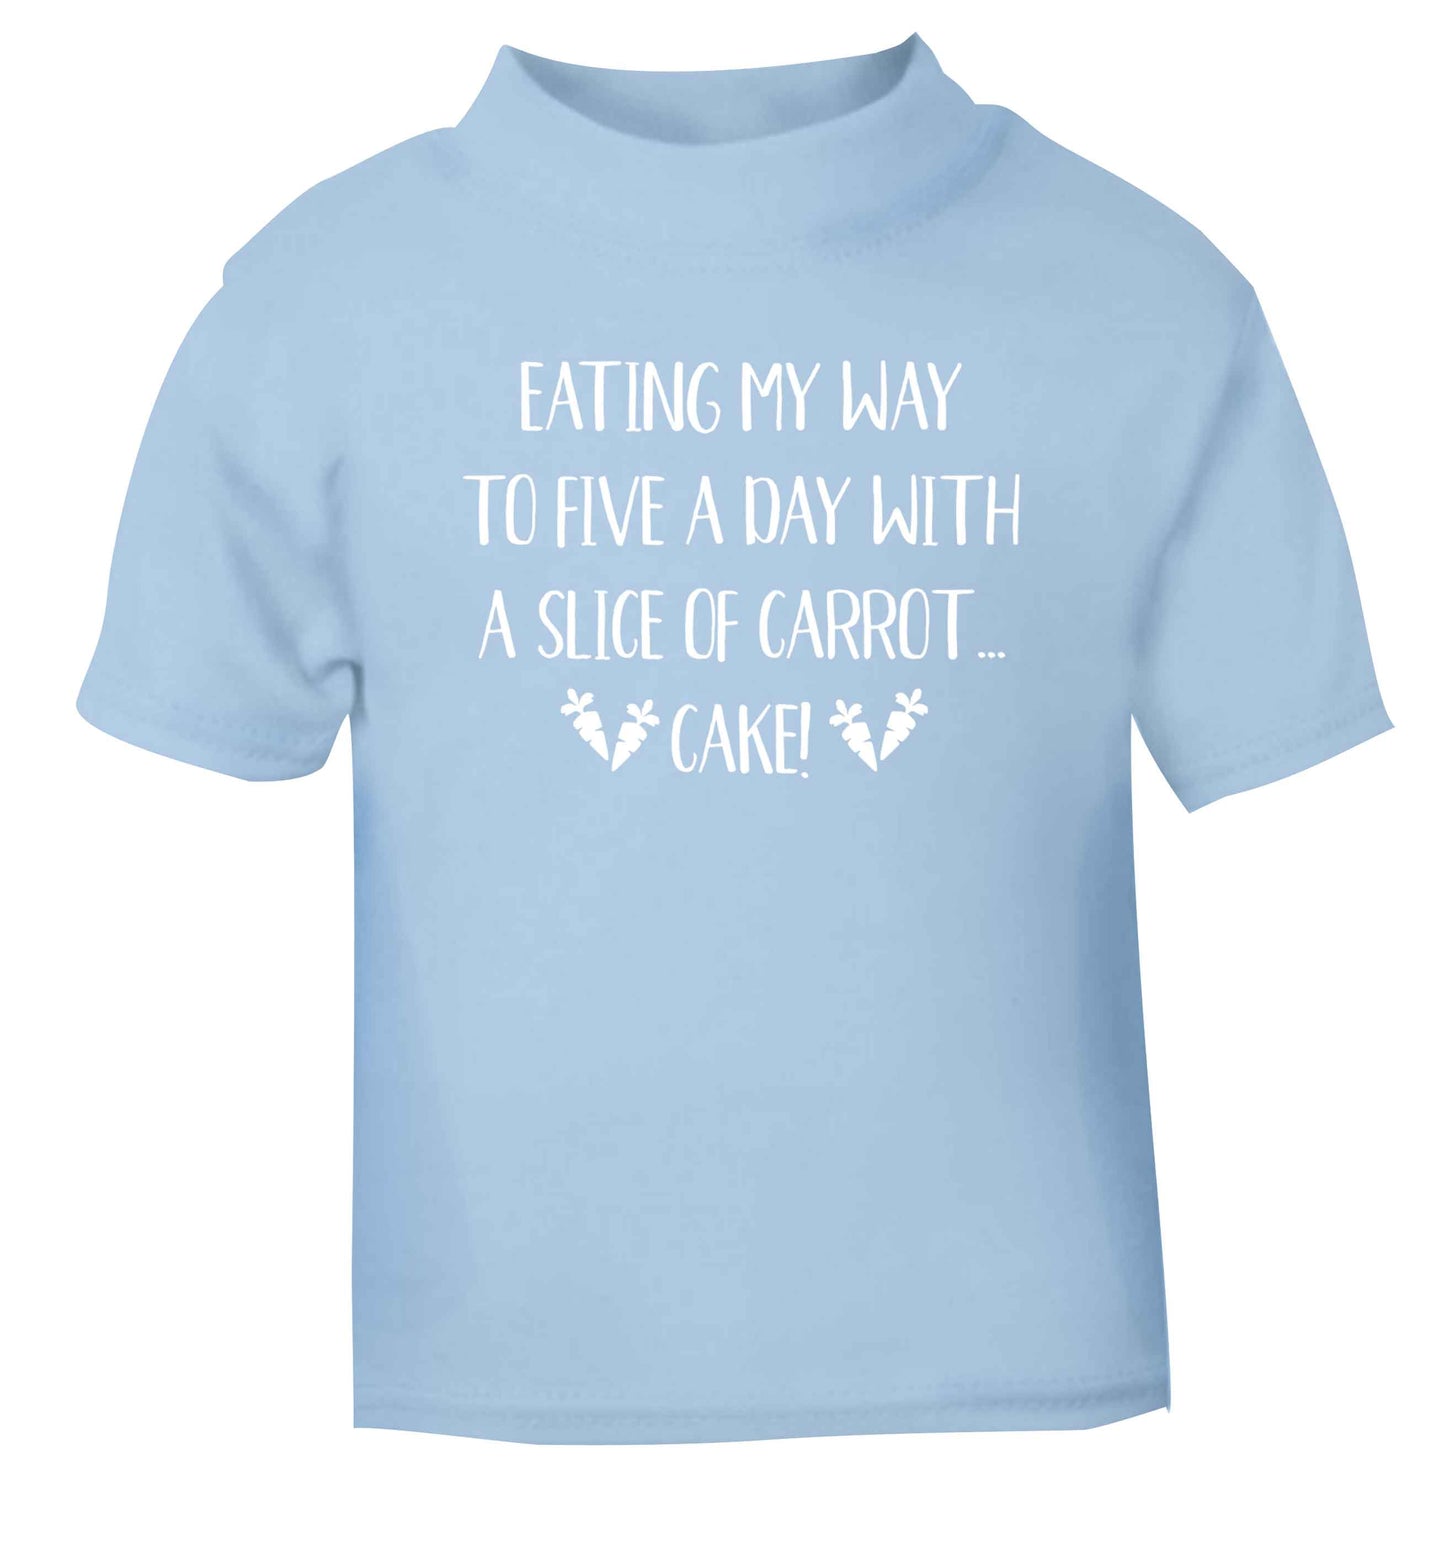 Eating my way to five a day with a slice of carrot cake day light blue Baby Toddler Tshirt 2 Years